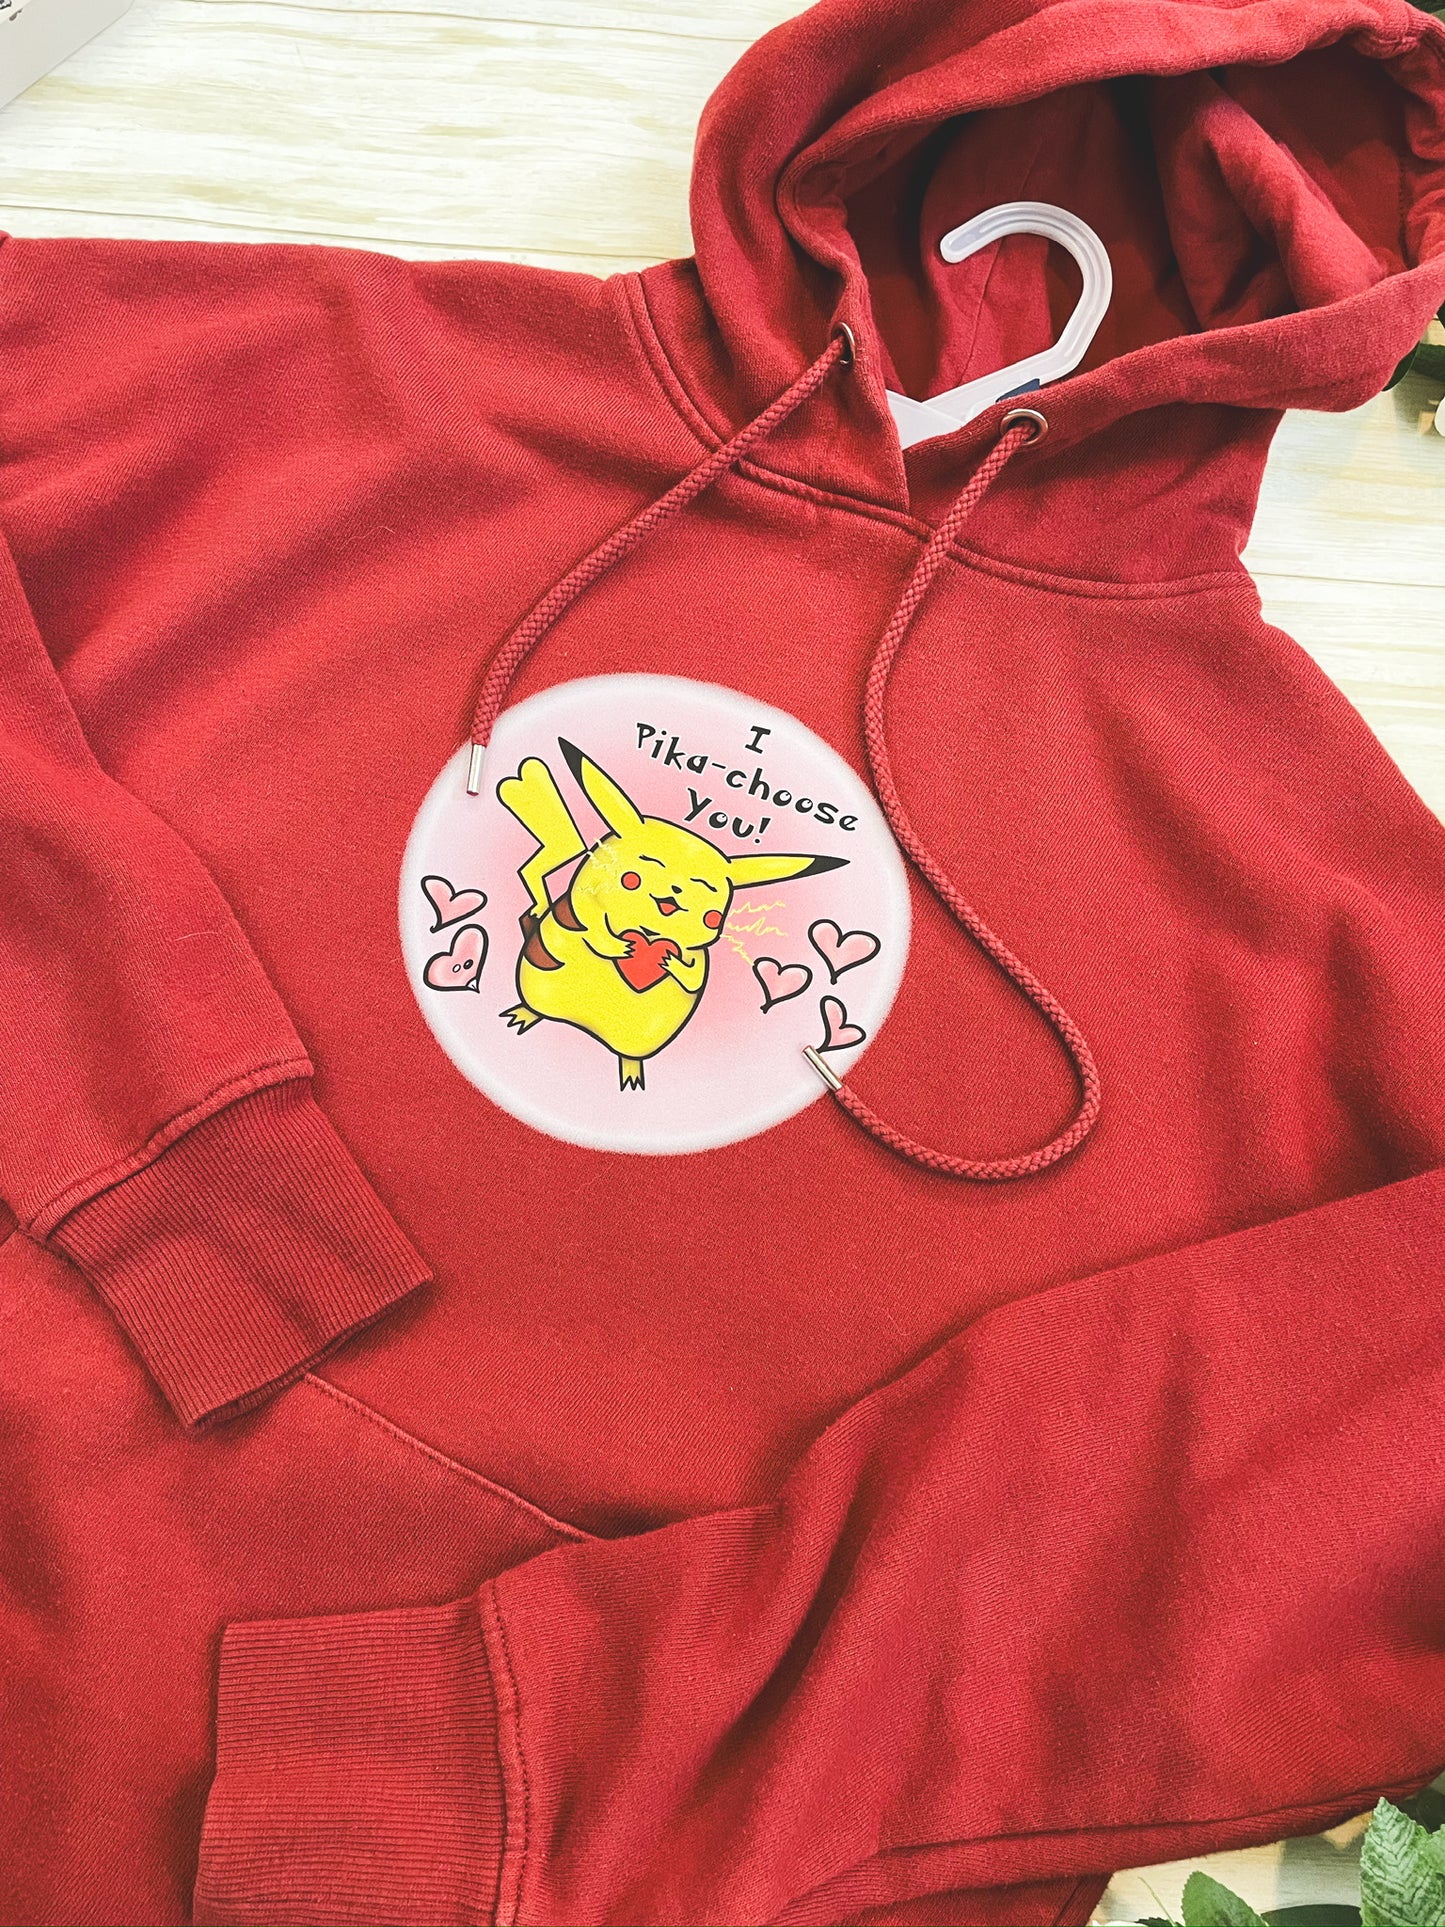 Thrifted - Youth XL - "The I Pika-choose You!"